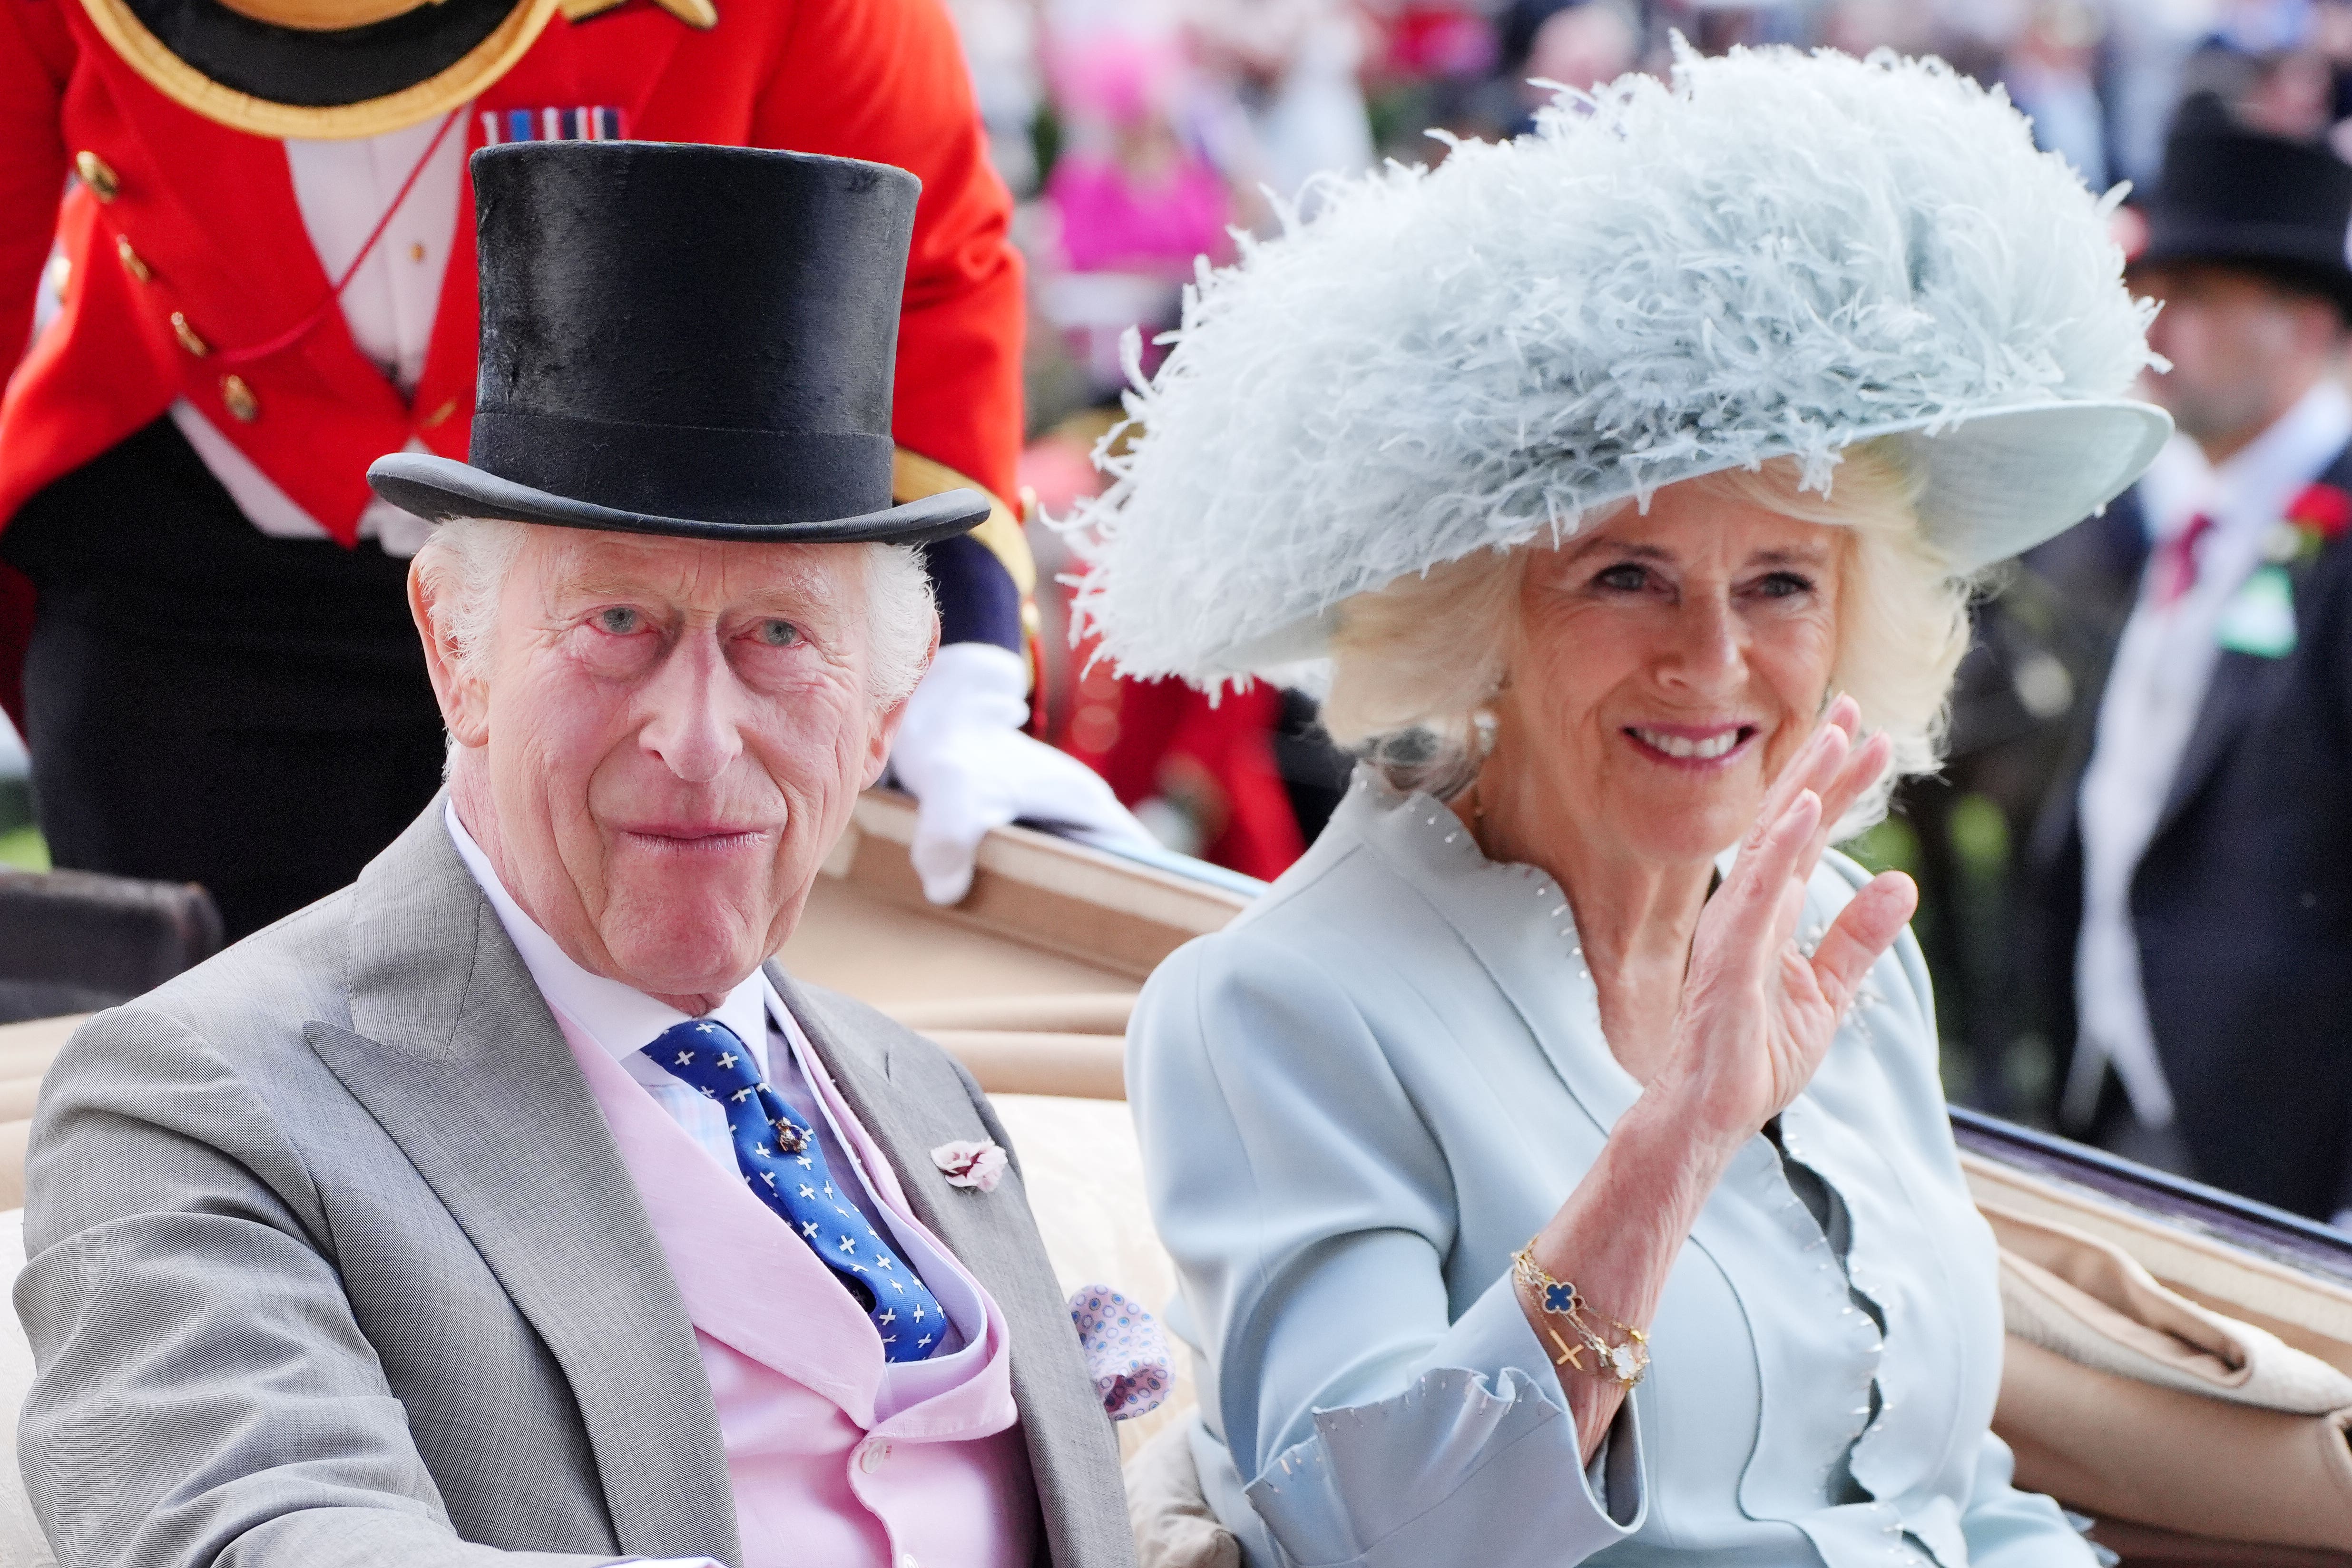 The King and Queen arrive by carriage on the fourth day of Royal Ascot (Pennsylvania)